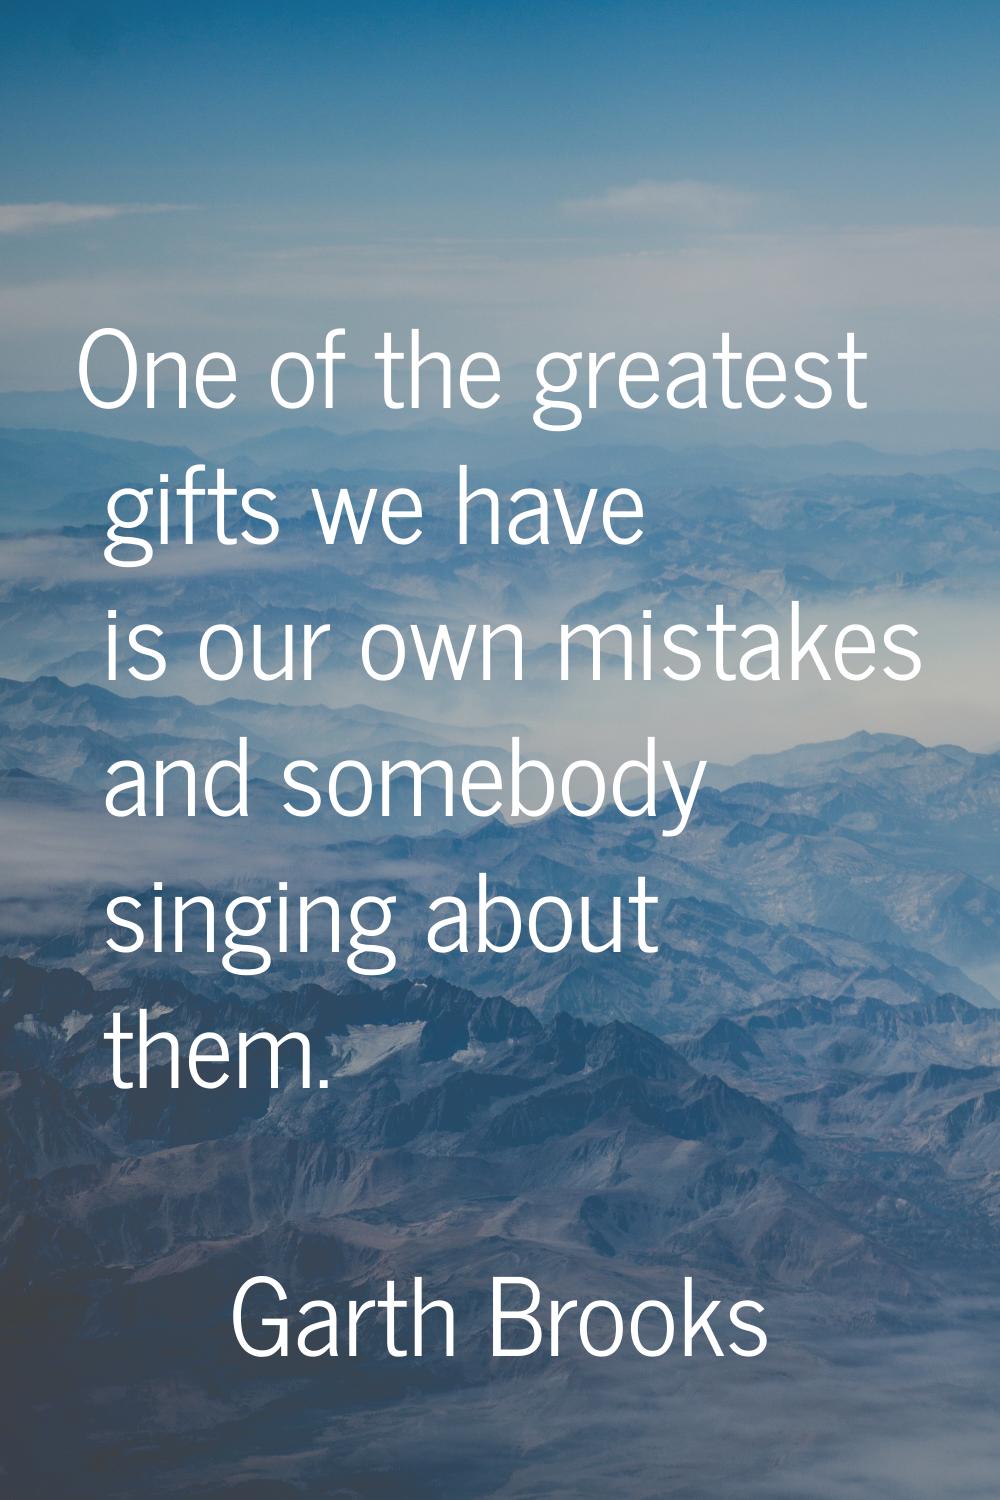 One of the greatest gifts we have is our own mistakes and somebody singing about them.